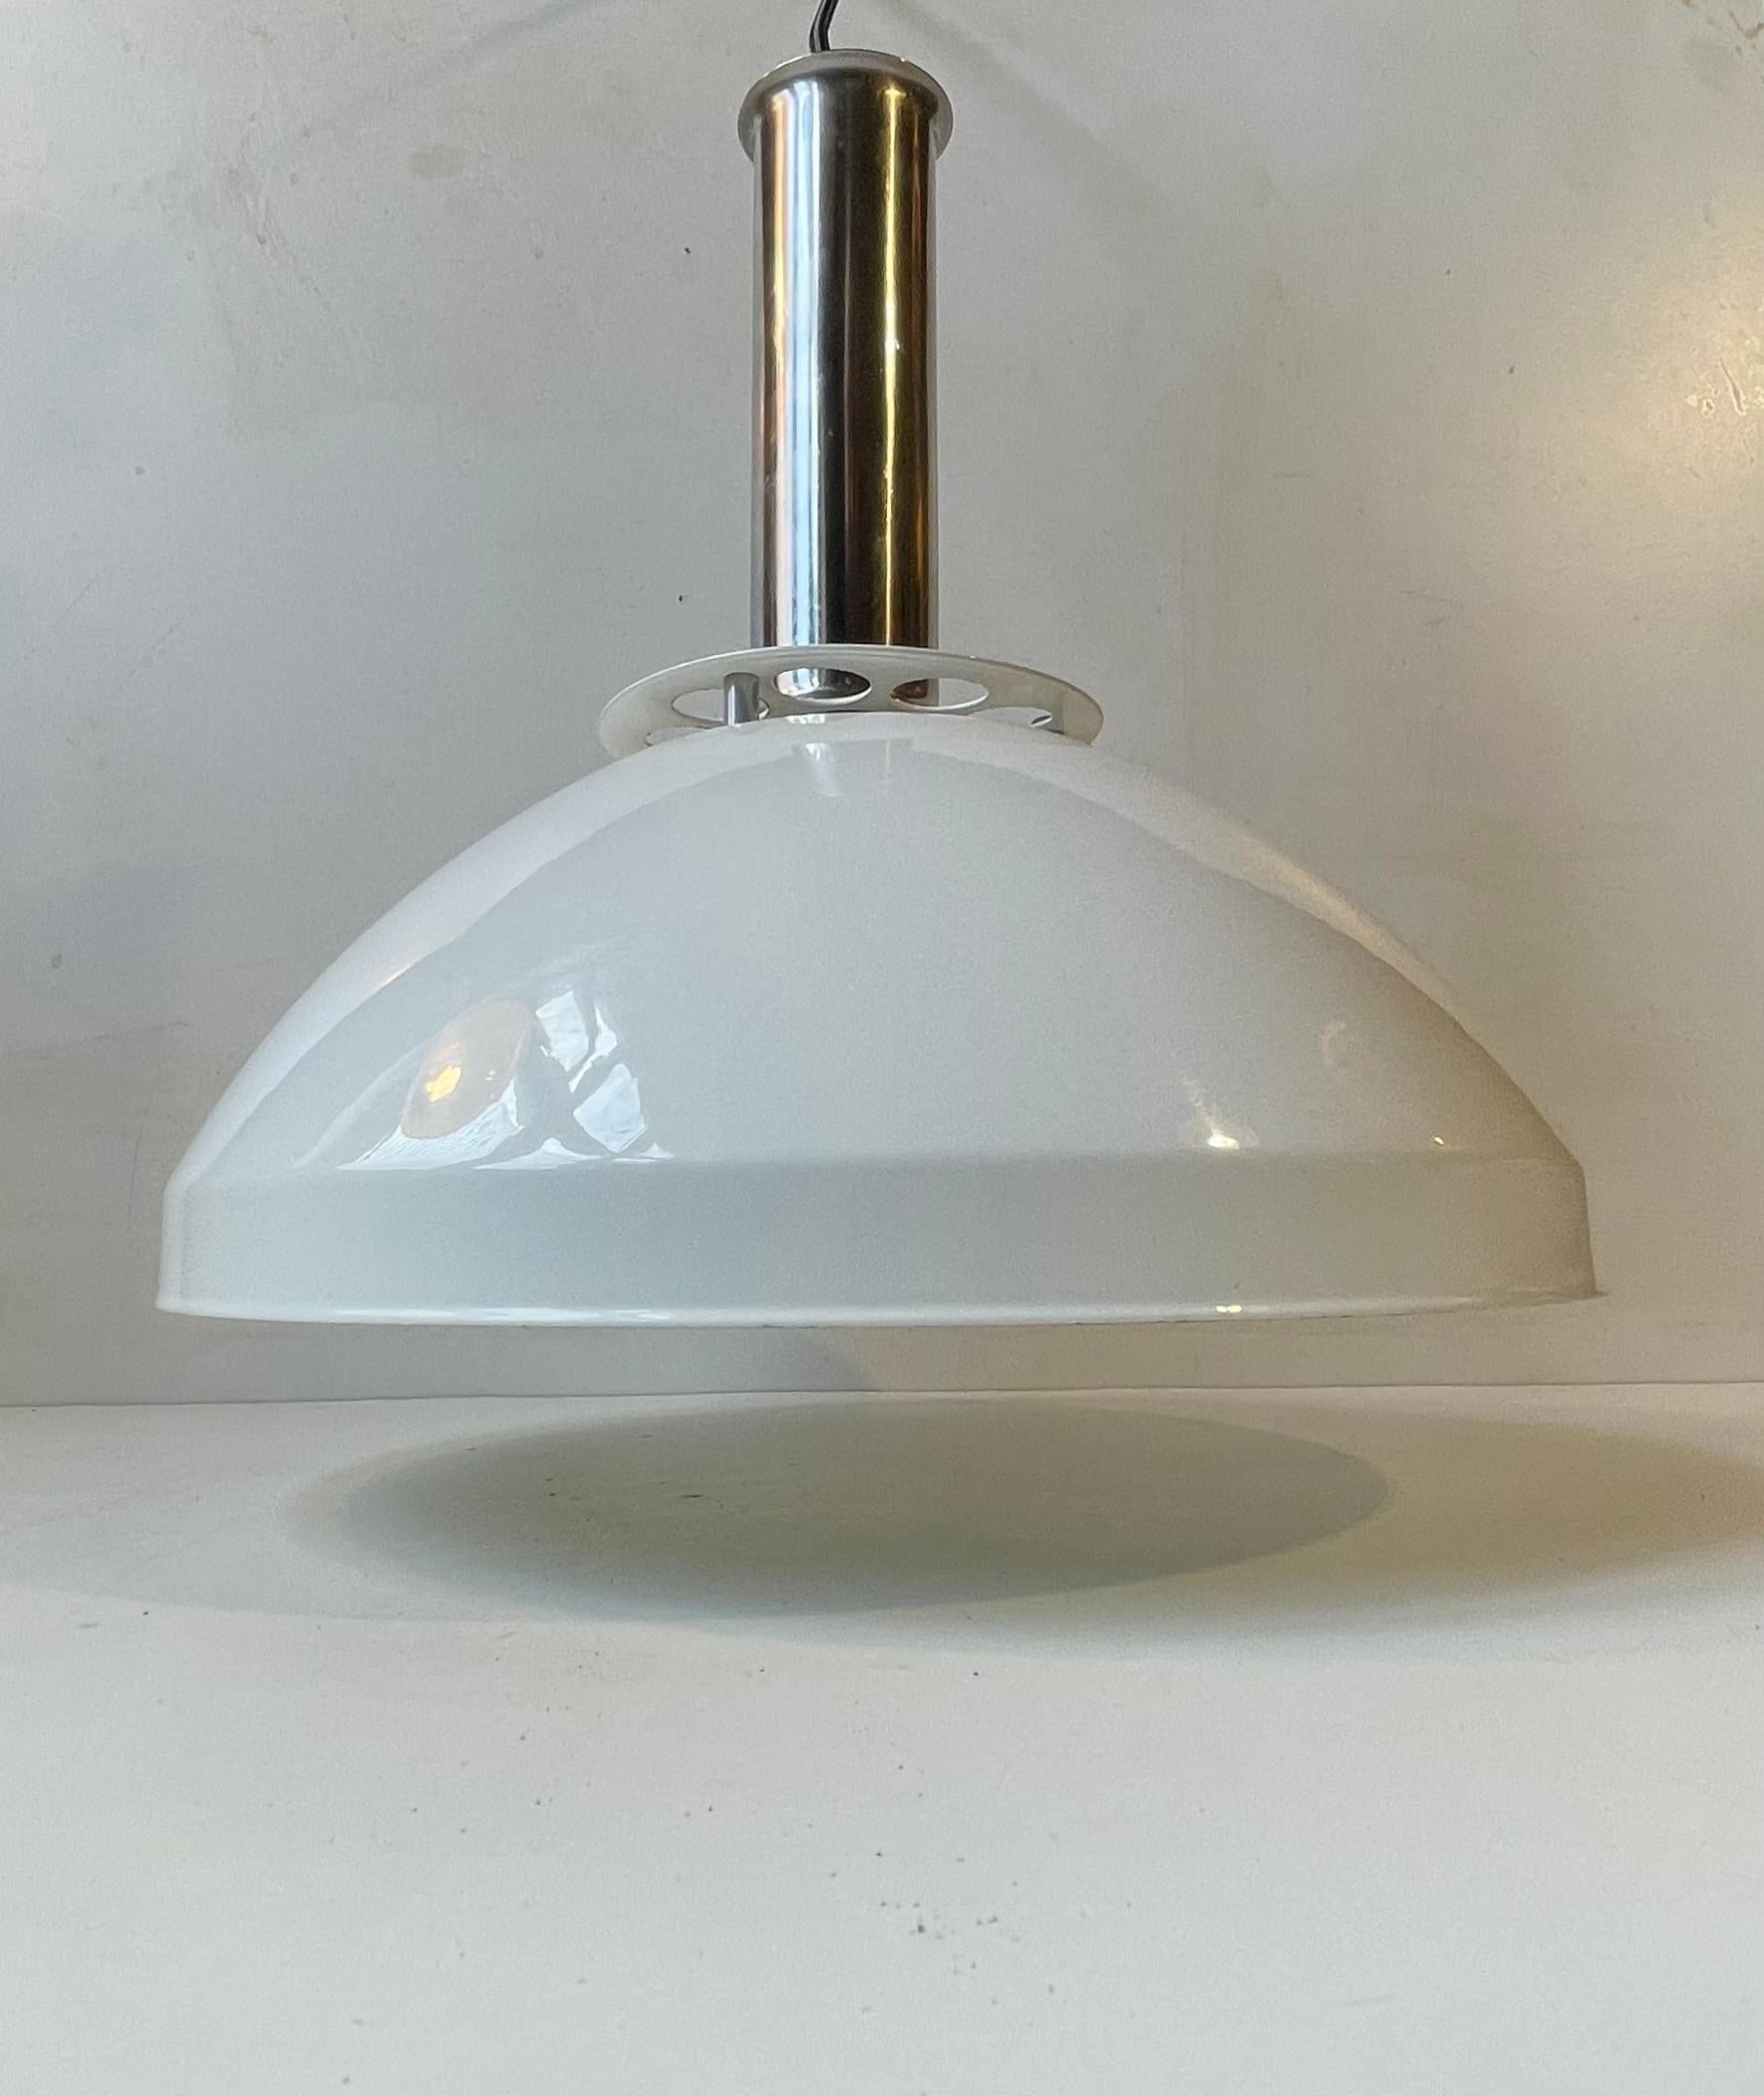 Italian Industrial Ceiling Lamp in White Enamel and Chrome Plating, 1970s For Sale 4